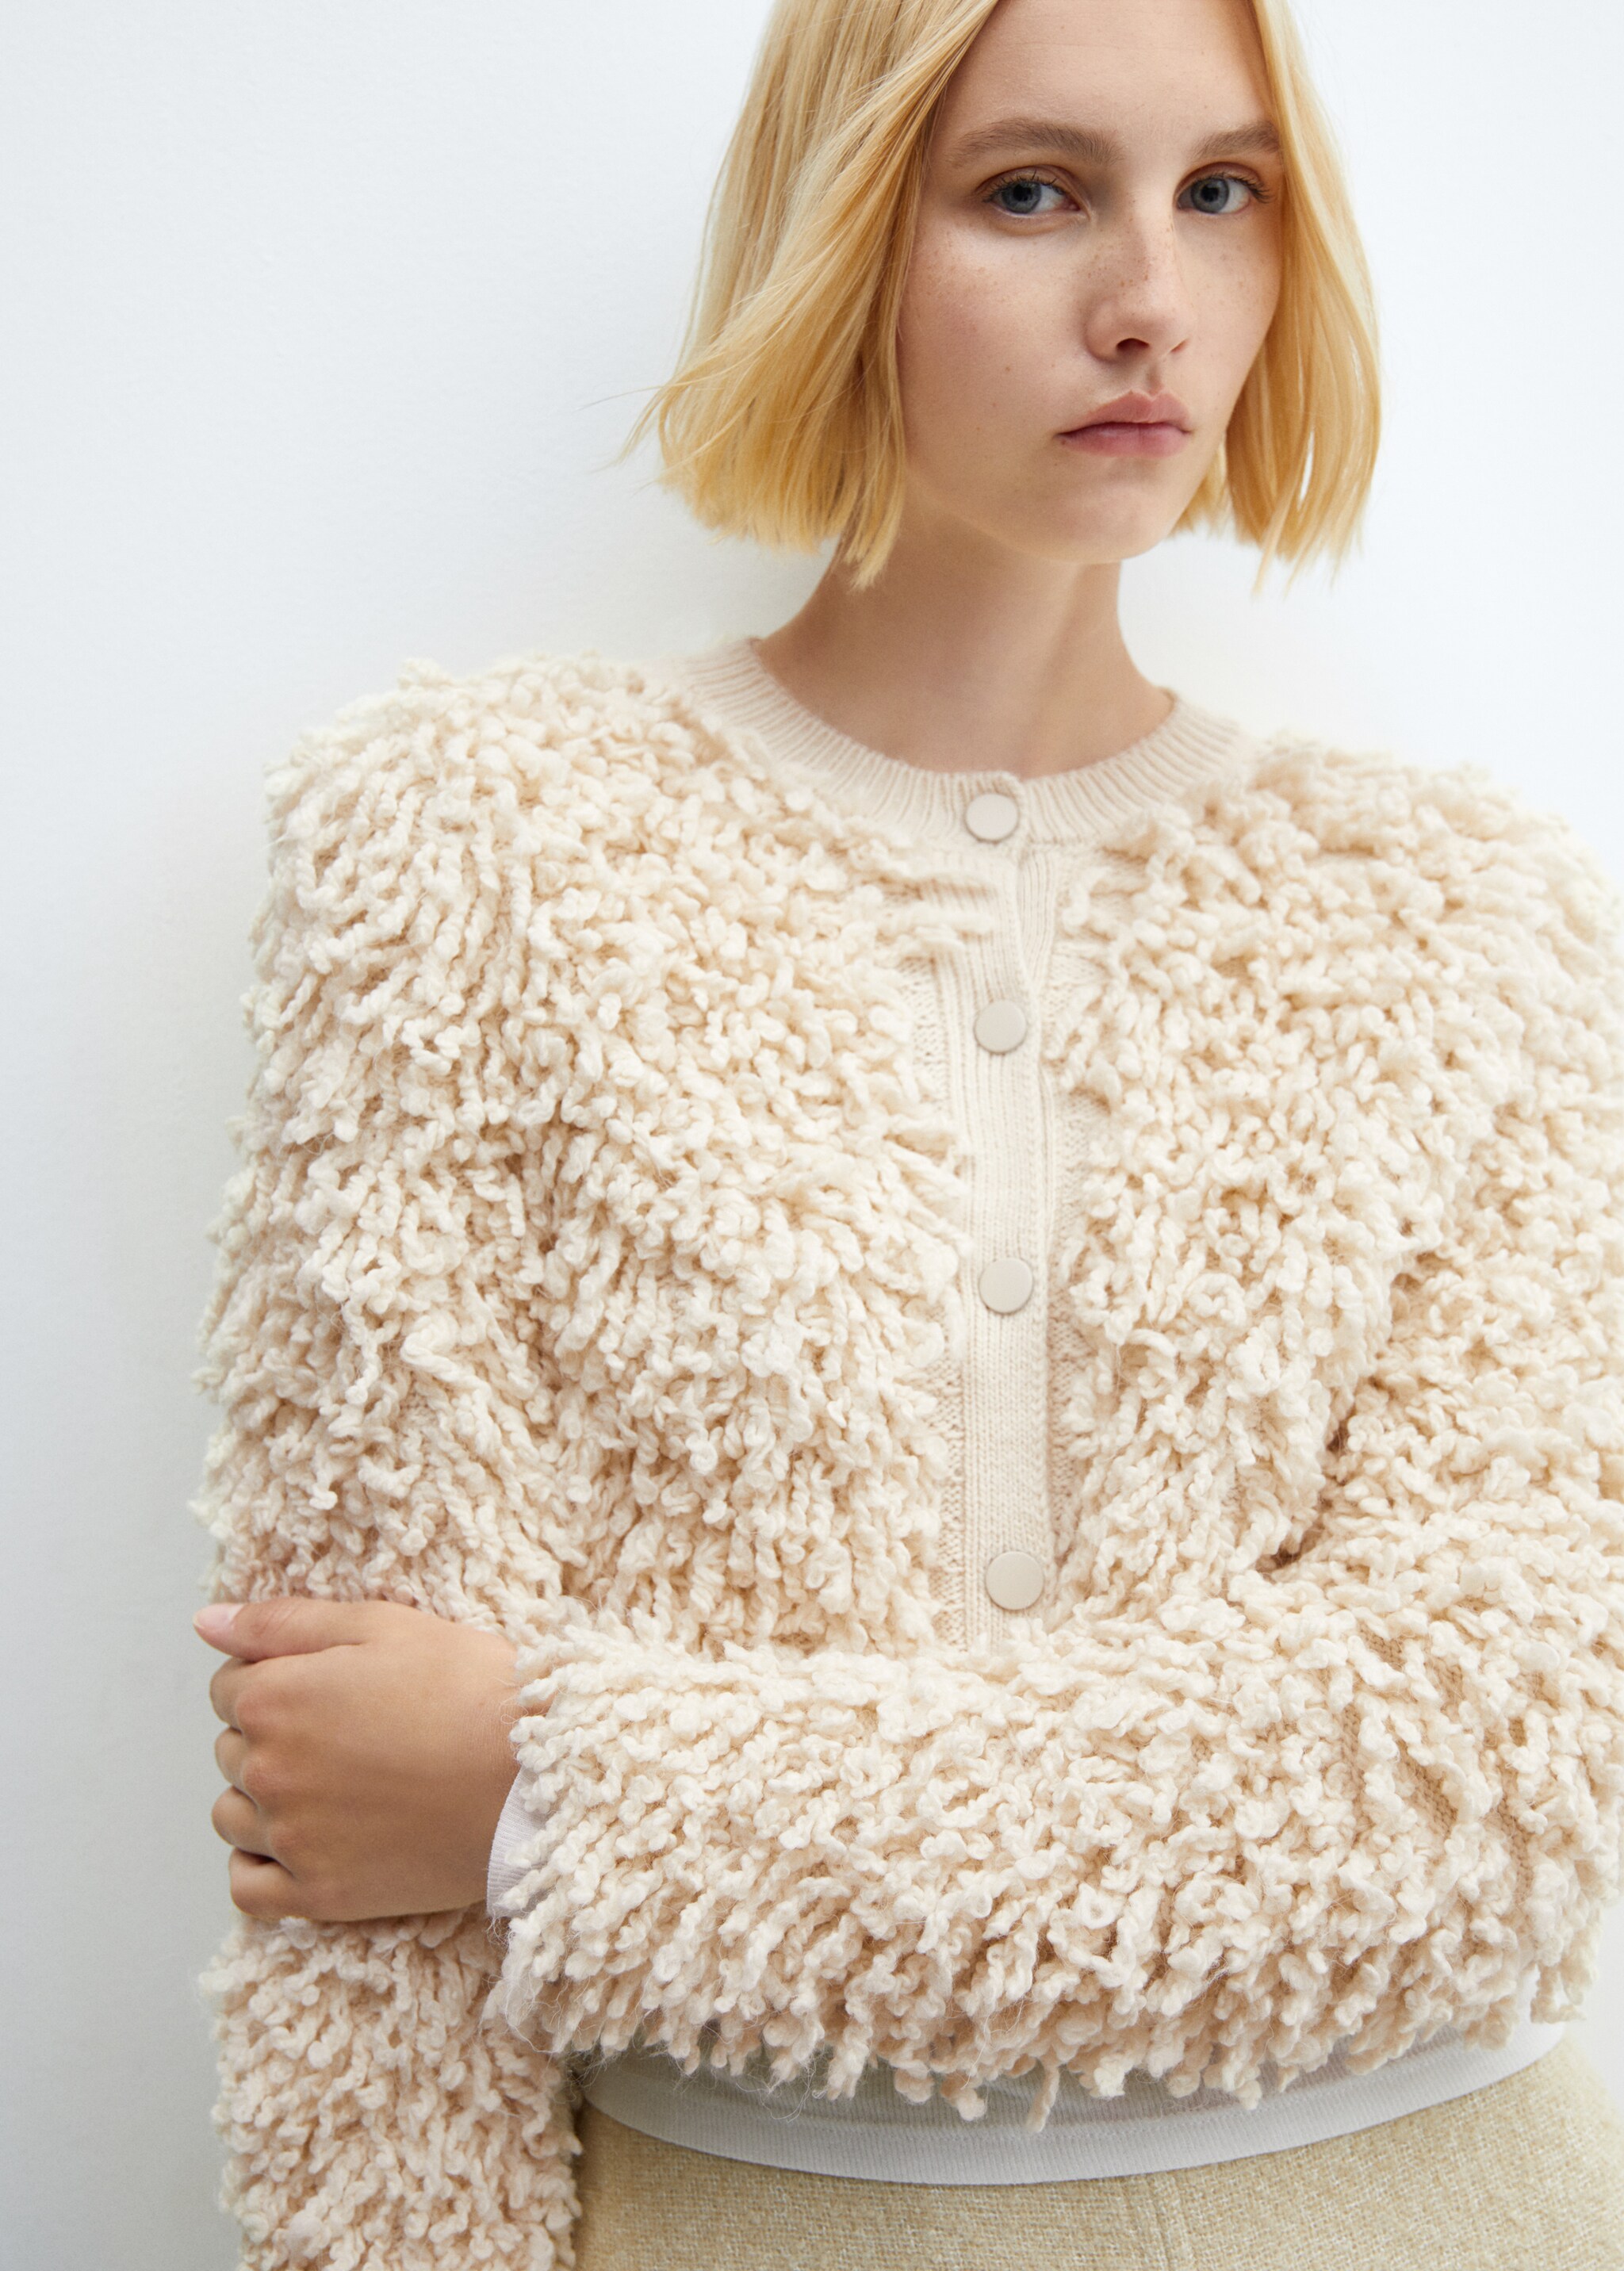 Textured knit cardigan - Details of the article 1